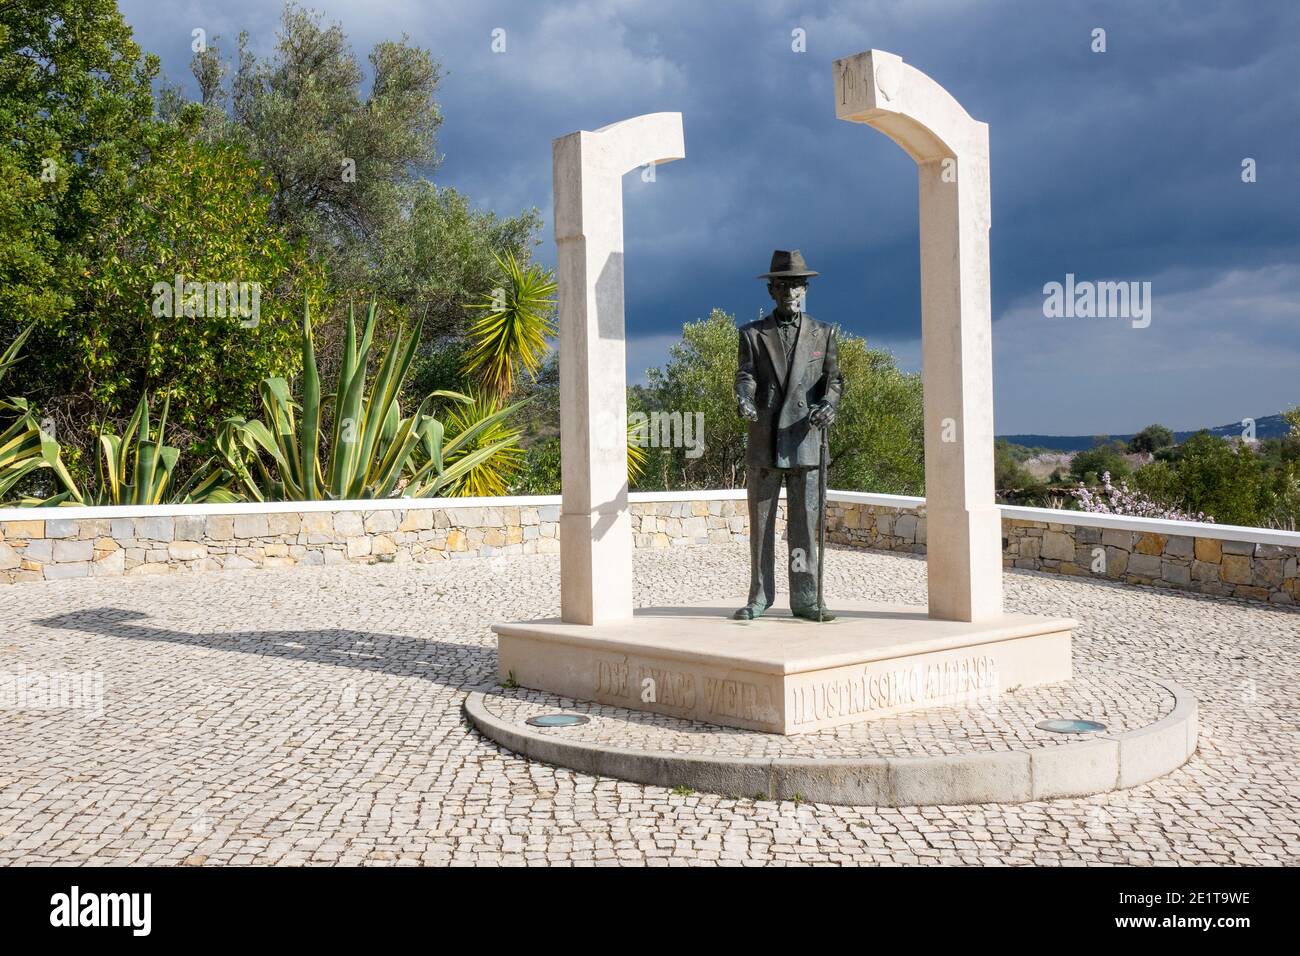 Statue Monument To José Cavaco Vieira In Alte Portugal, José Cavaco Vieira Born In Alte A Musician, Businessman And Patron Of The Arts Stock Photo